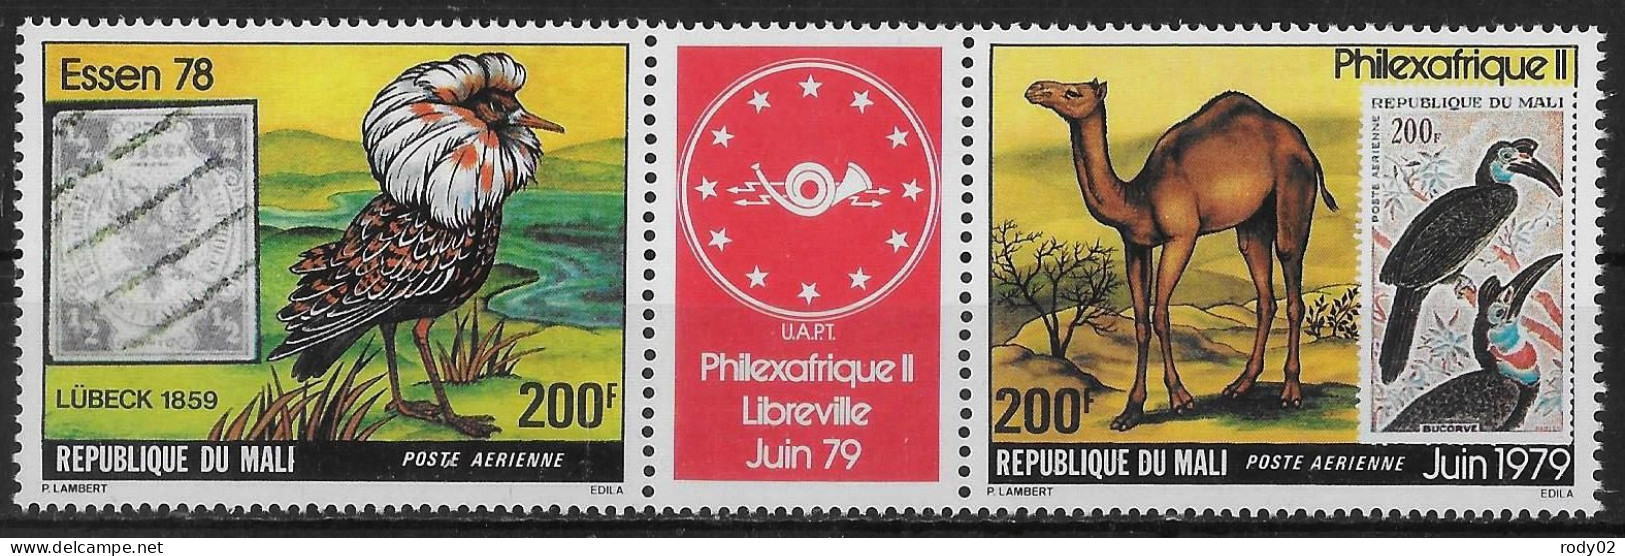 MALI - TIMBRES SUR TIMBRES ET ANIMAUX - PA 355A - NEUF** MNH - Mali (1959-...)